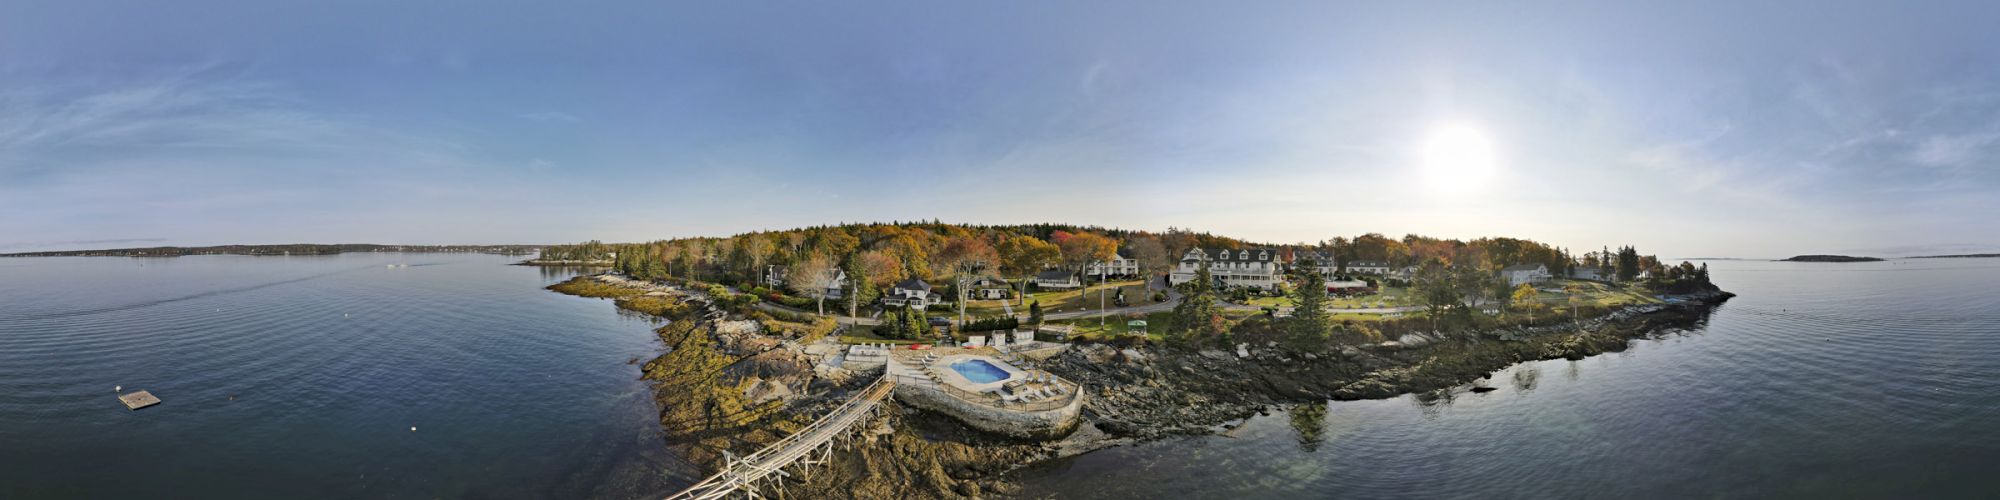 Aerial view of a scenic coastal area with a pier, rocky shore, houses, and lush trees under a bright sky, and the sun low in the sky, ending the sentence.